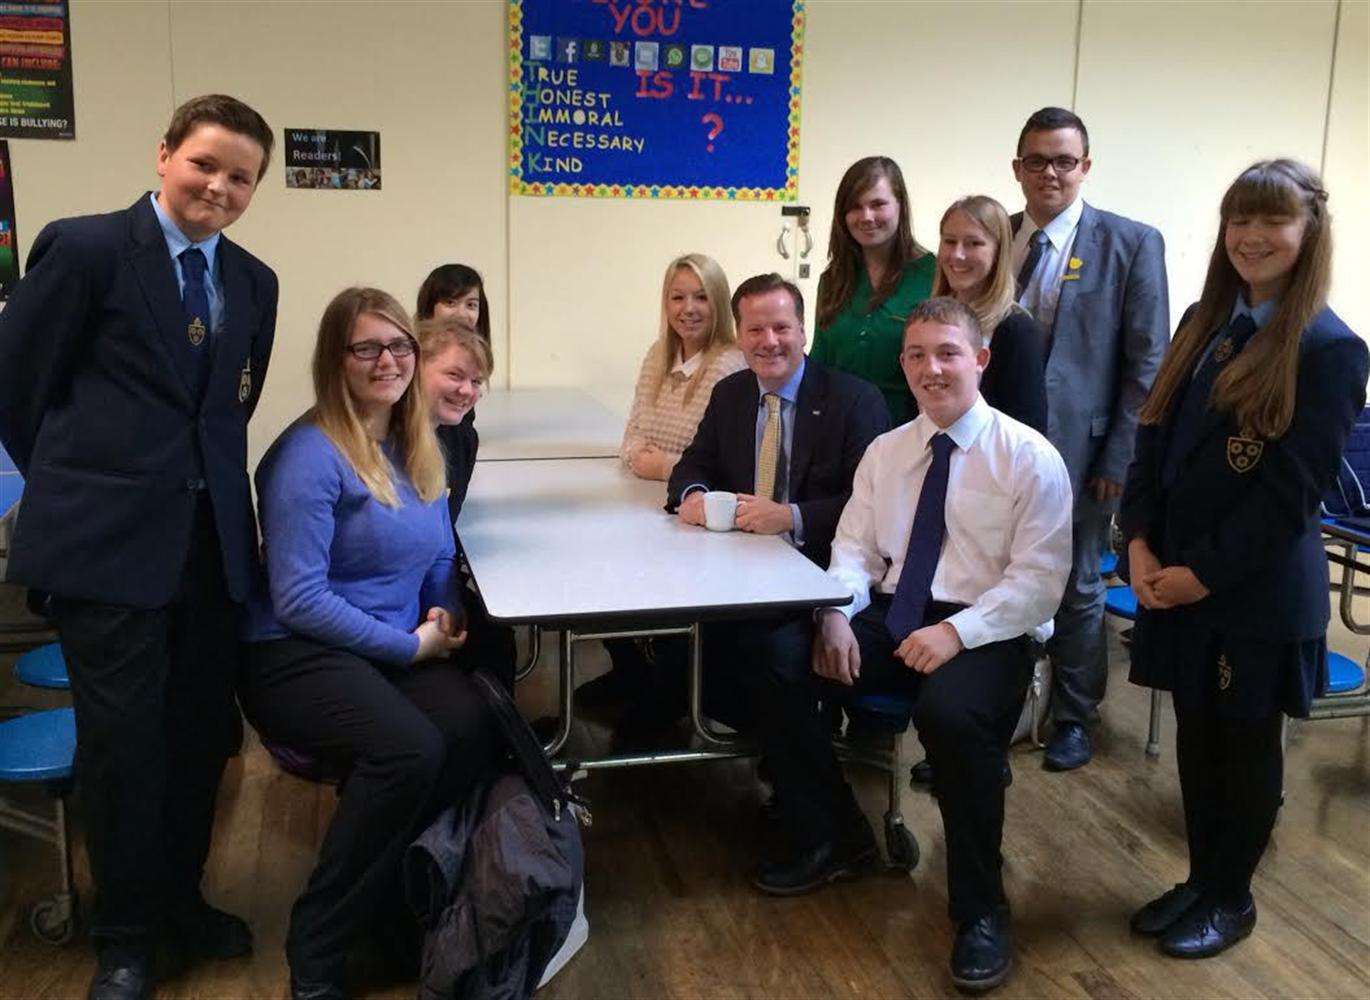 Charlie Elphicke MP with students from St Edmund's Catholic School.